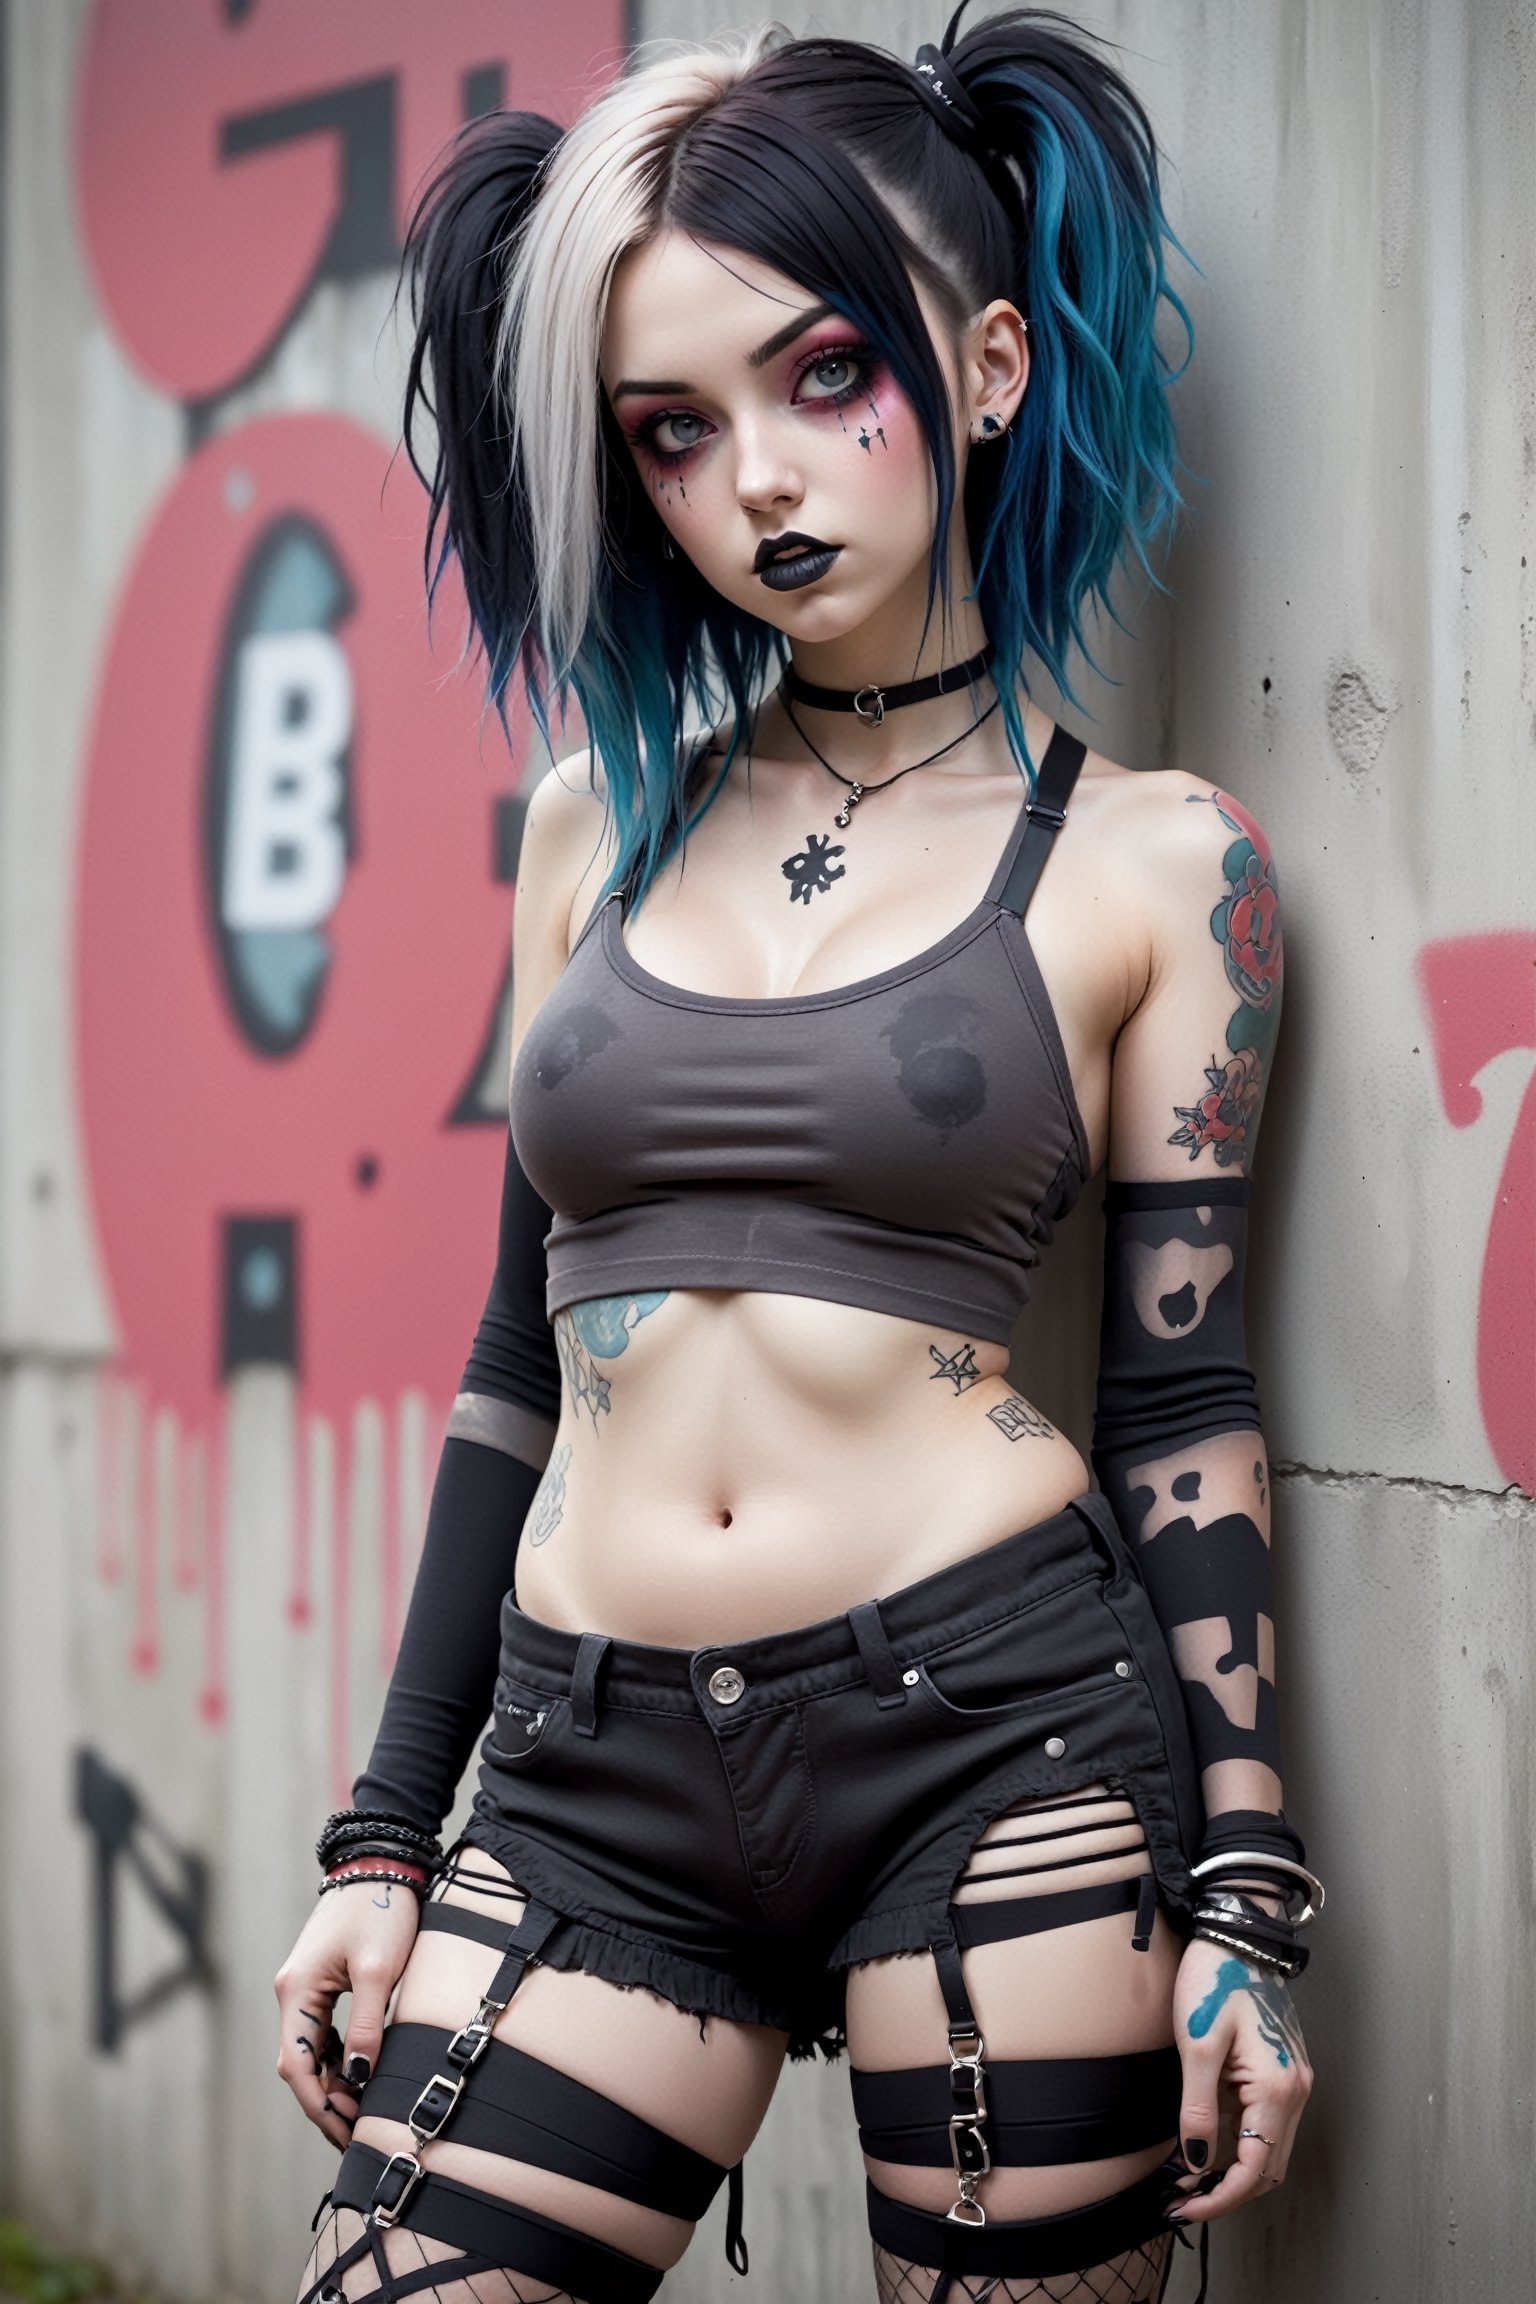 beautiful 20yo girl, a girl in Fairy Grunge fashion, blending ethereal charm with a touch of grunge edge, She wears a tiny micro bikini top and panties, baseball boots and torn black stockings, creating a whimsical contrast to the rebellious aesthetic. Messy, multi-colored hair and makeup complete the look, baseball boots, goth person, piercings, nipple piercing, tattoos, ExStyle, Urban Grafitti covered concrete wall Background, AI_Misaki, p3rfect boobs, Wonder of Beauty,p3rfect boobs,cleavage,TechStreetwear